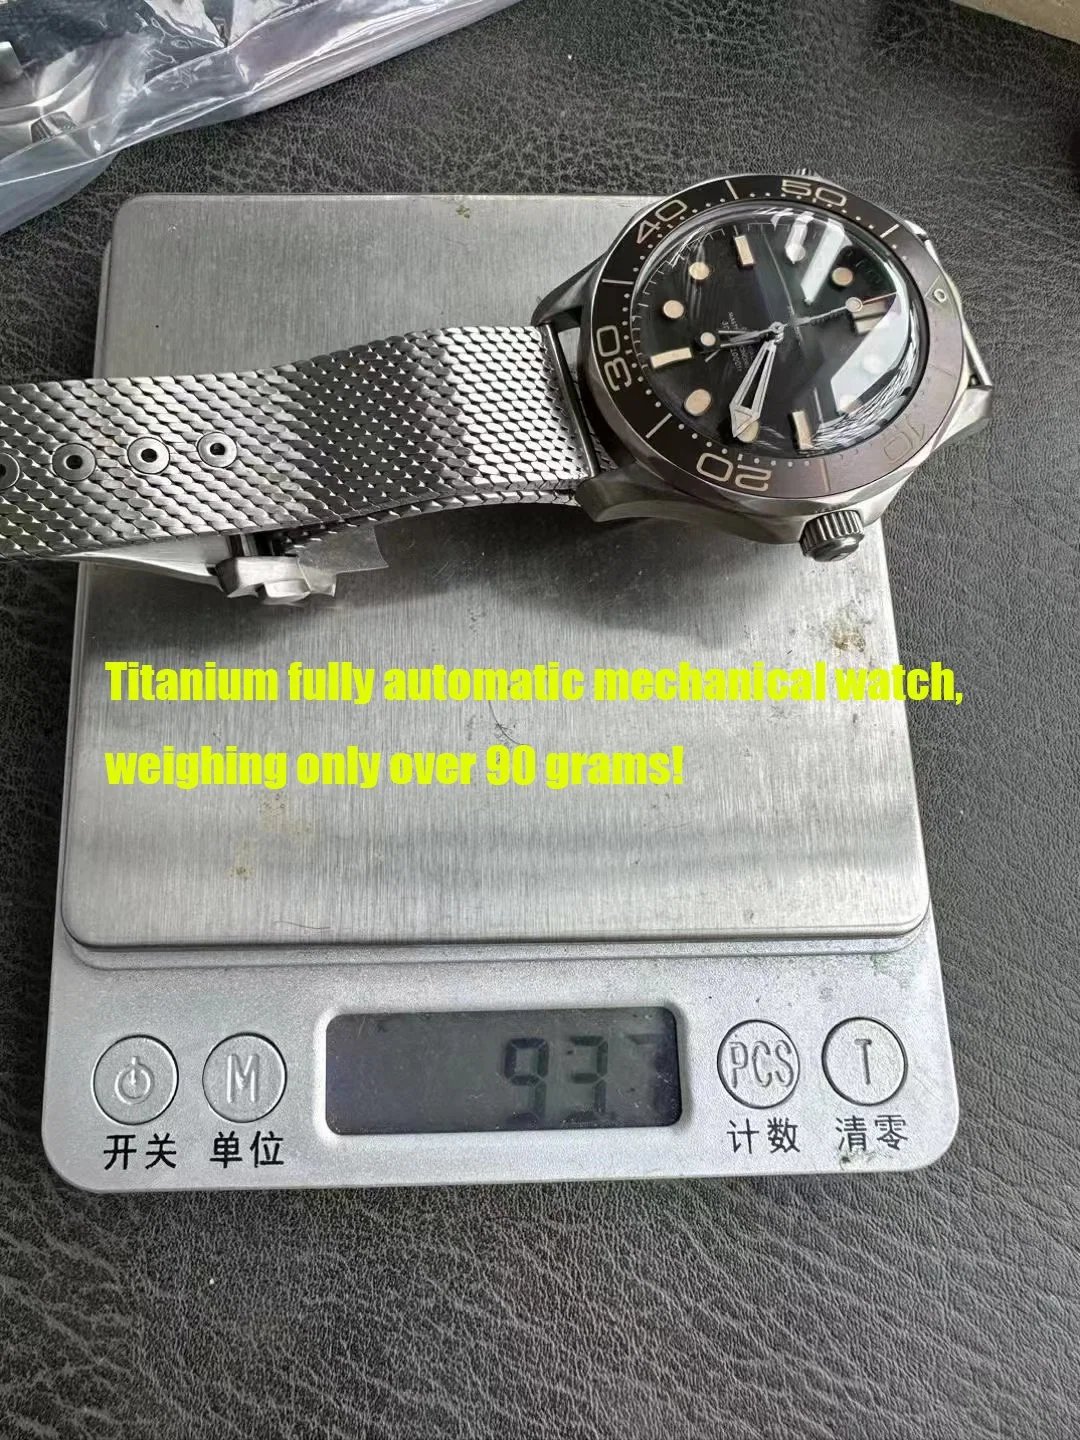 Super Clone Vs Factory 8806 Movement 5A Titanium Watch Luxury Watch Free Nylon Strap and Cloth Bag Packaging Stainless 42mm Men's Mechanical Watch